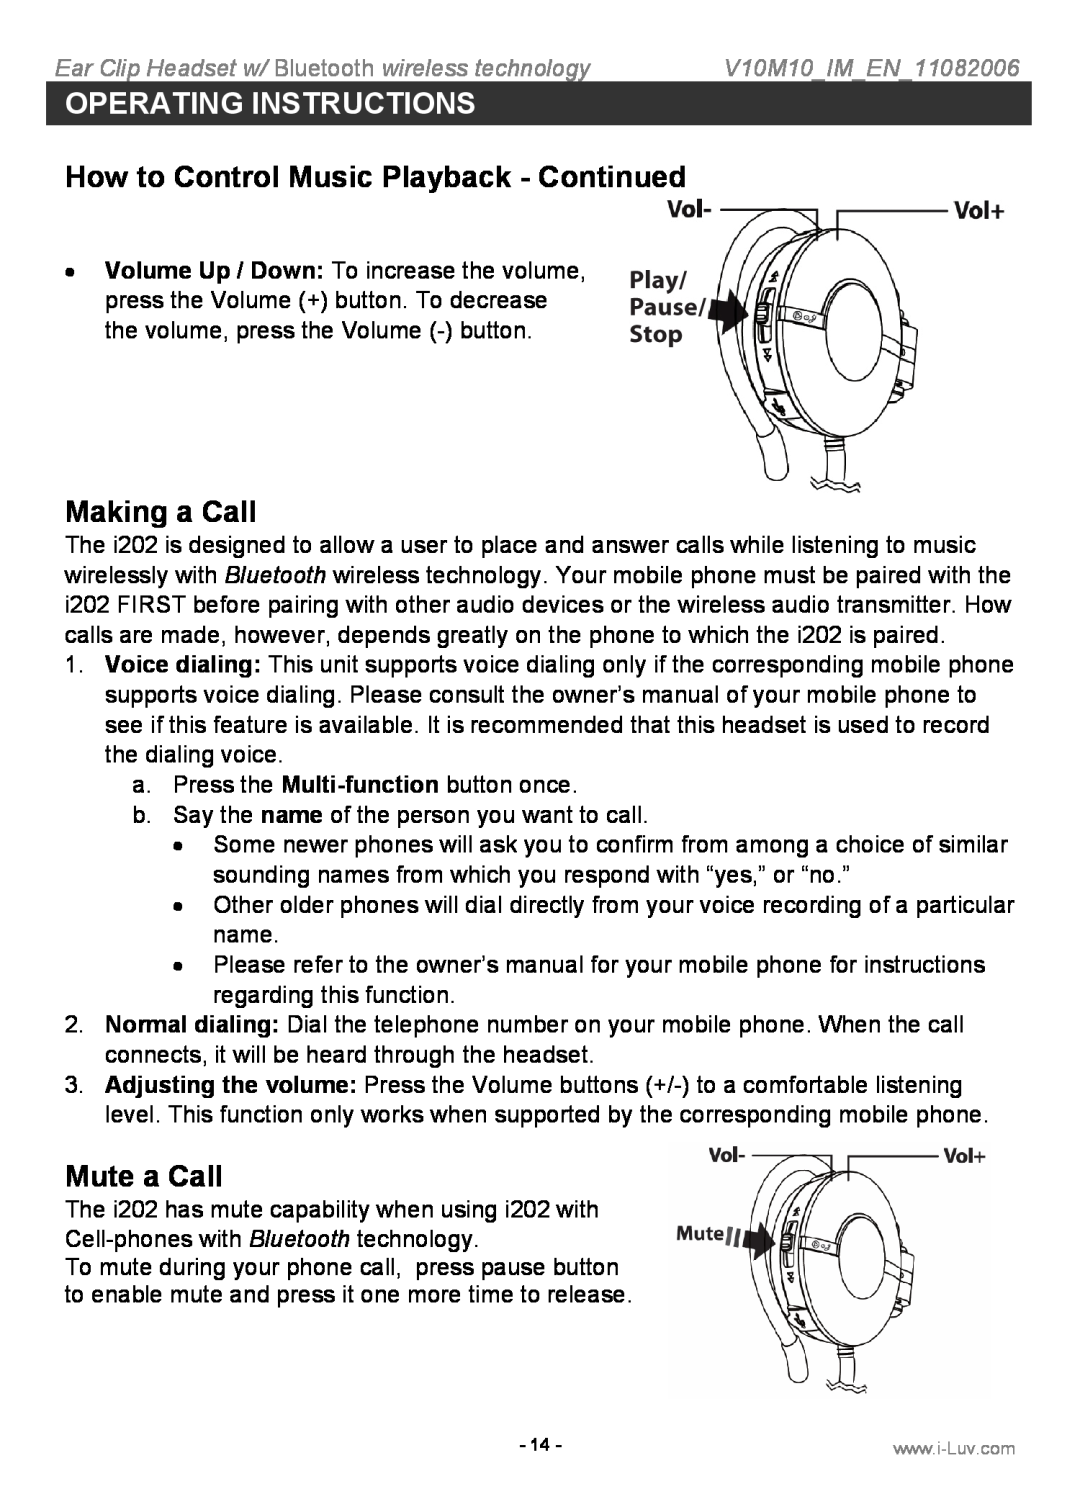 Iluv i202 instruction manual How to Control Music Playback - Continued, Making a Call, Mute a Call, Operating Instructions 